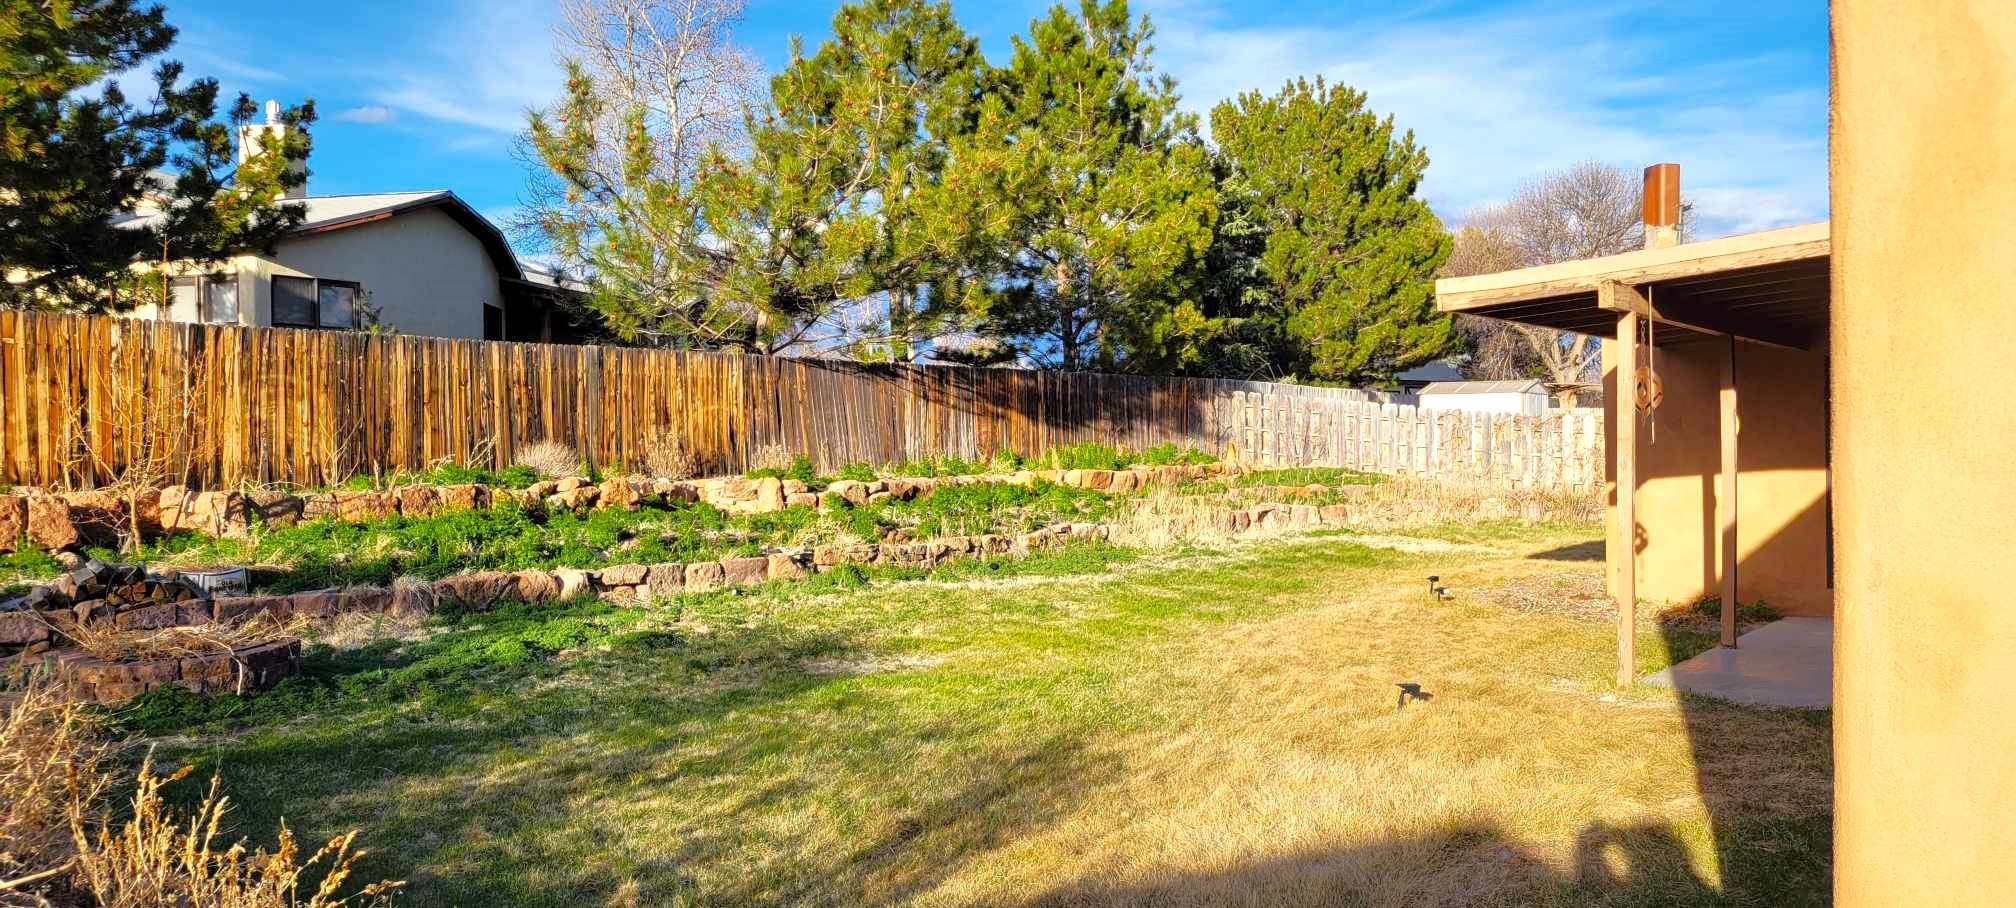 410 Rover Boulevard, White Rock, New Mexico 87547, 4 Bedrooms Bedrooms, ,2 BathroomsBathrooms,Residential,For Sale,410 Rover Boulevard,202401079